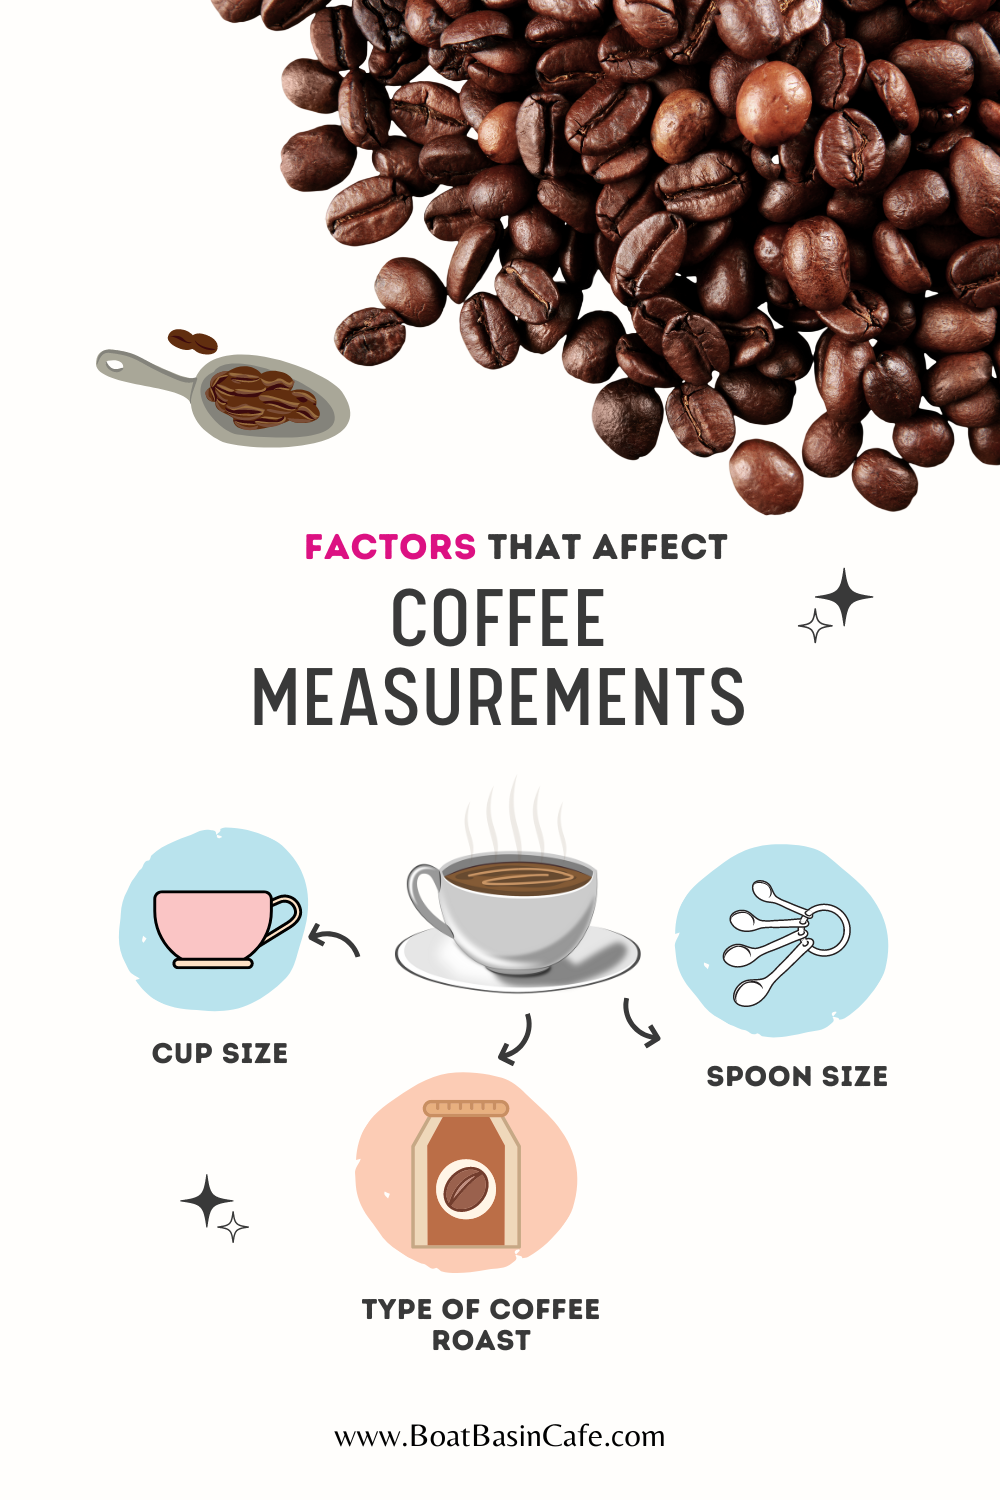 Other Factors That Affect Coffee Measurements